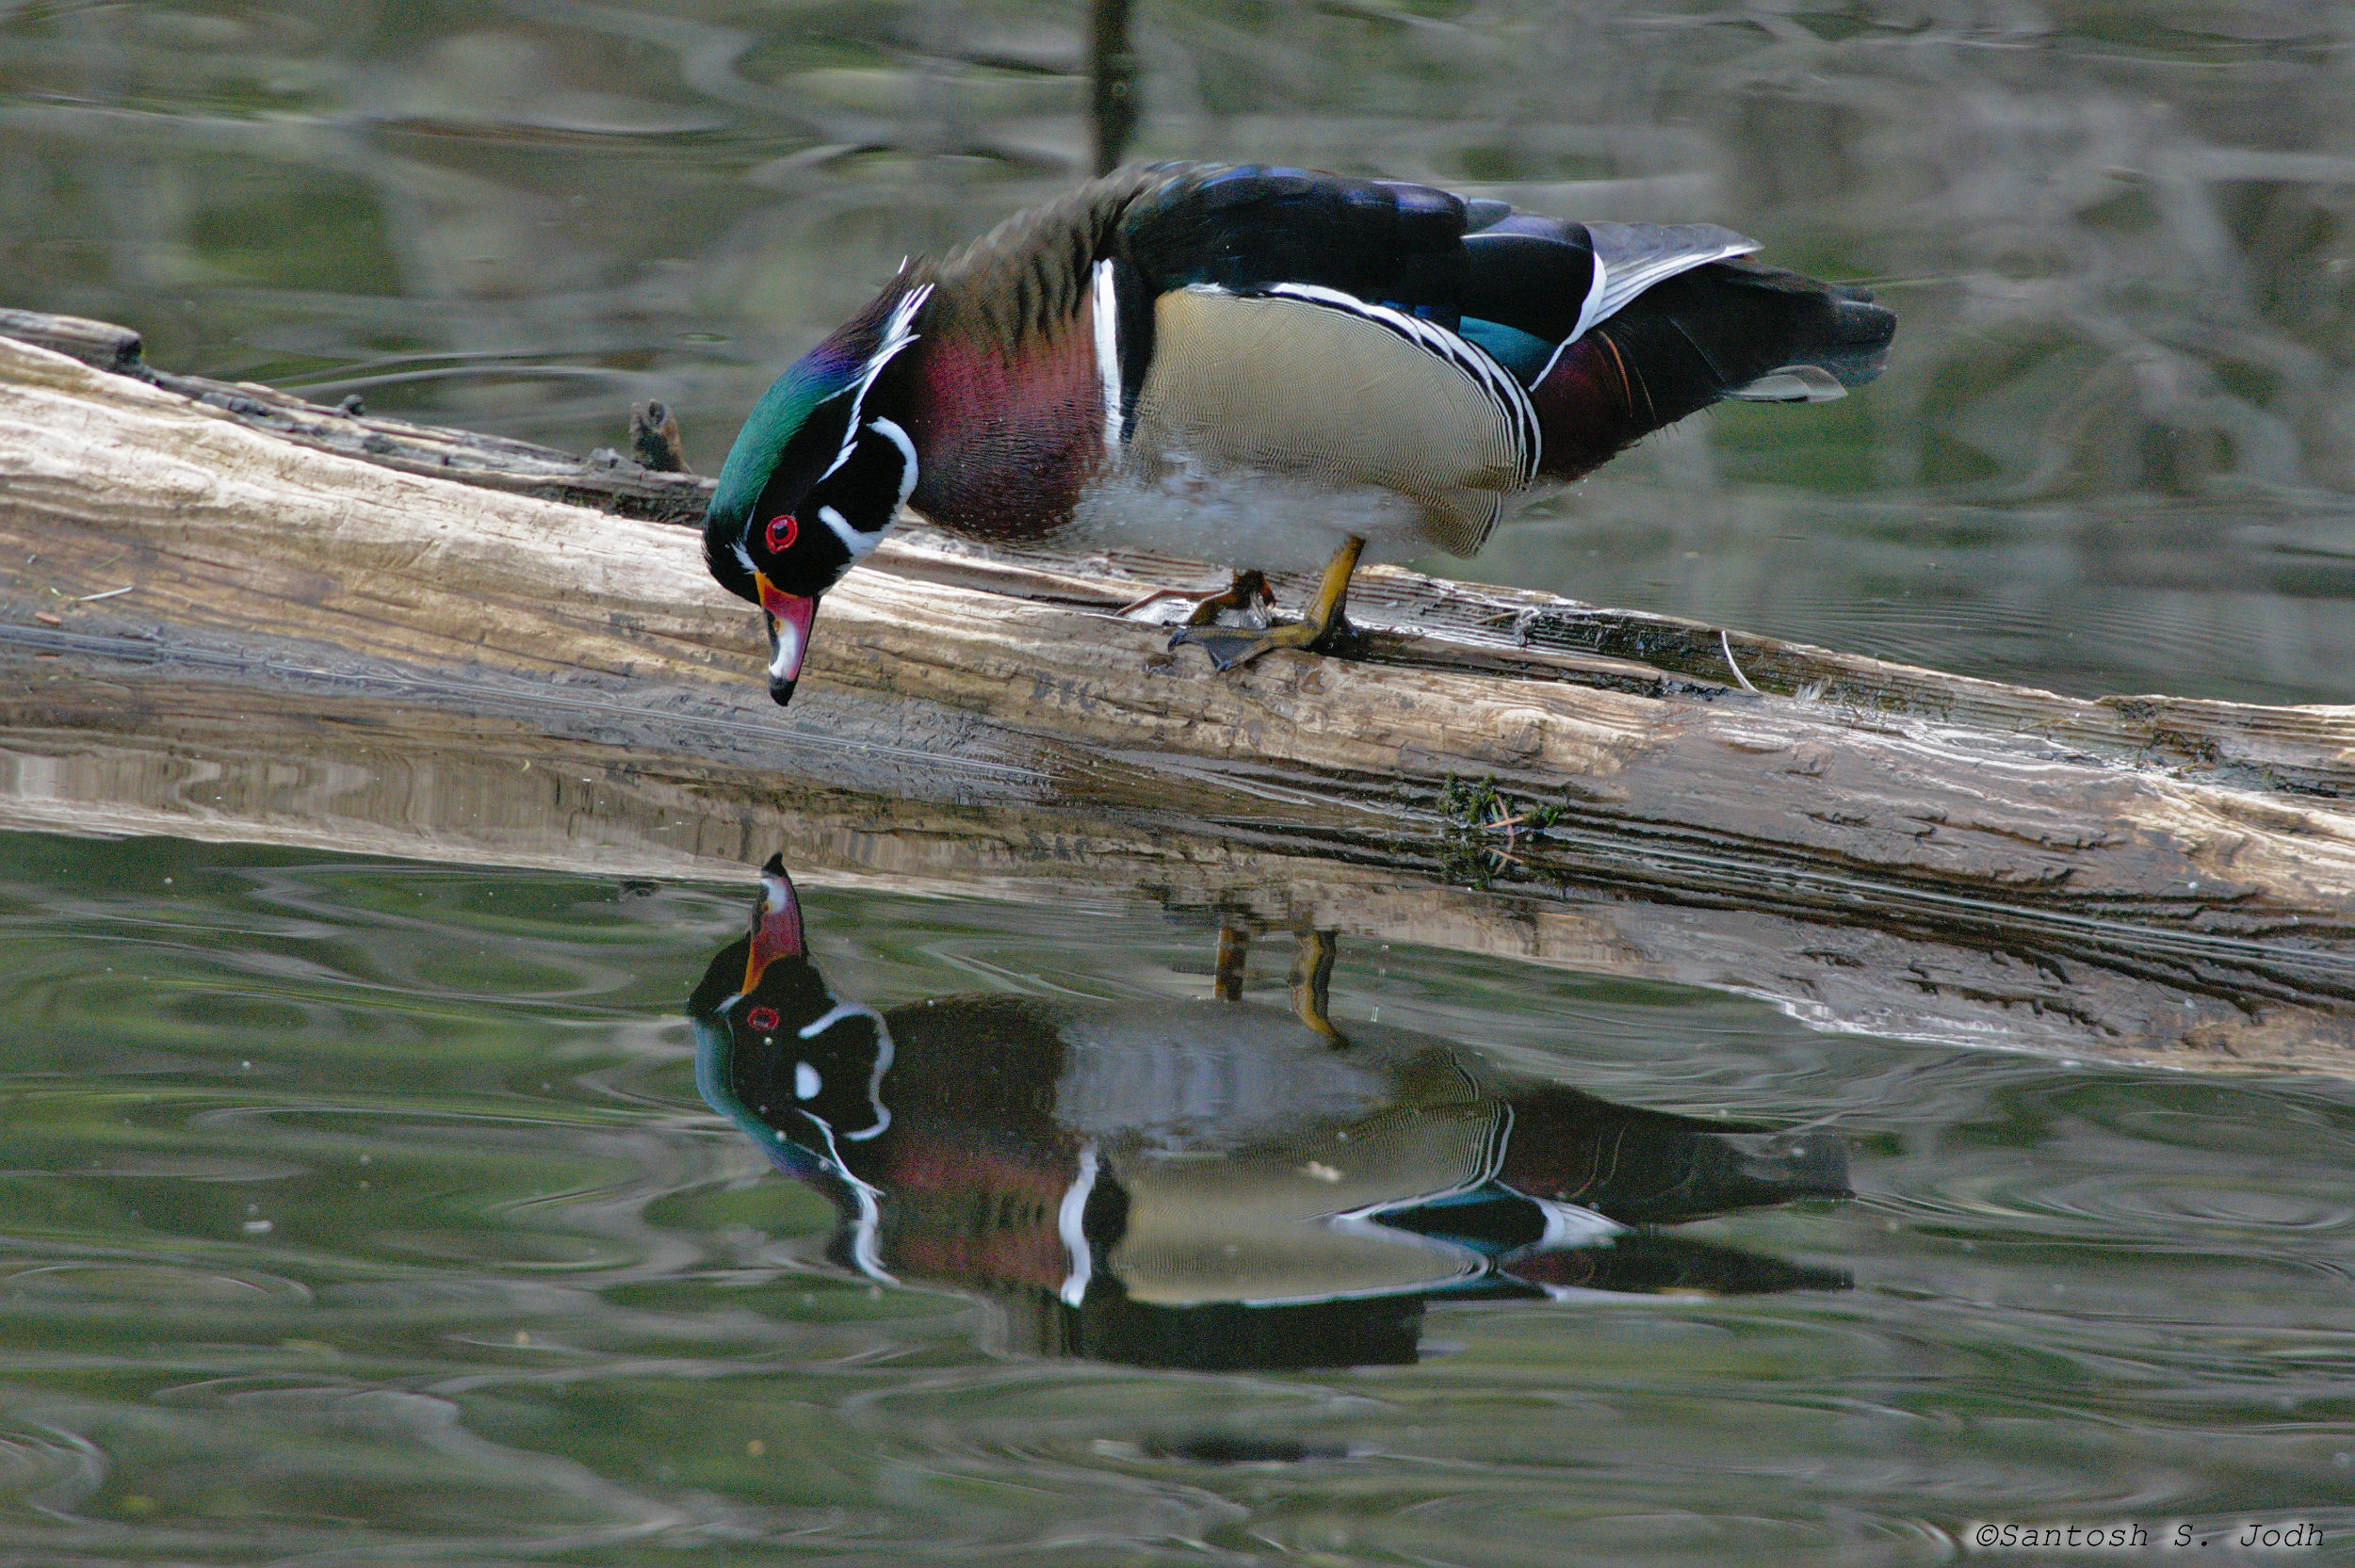 wood duck standing on log in lake, bending over as if looking at its reflection in the water